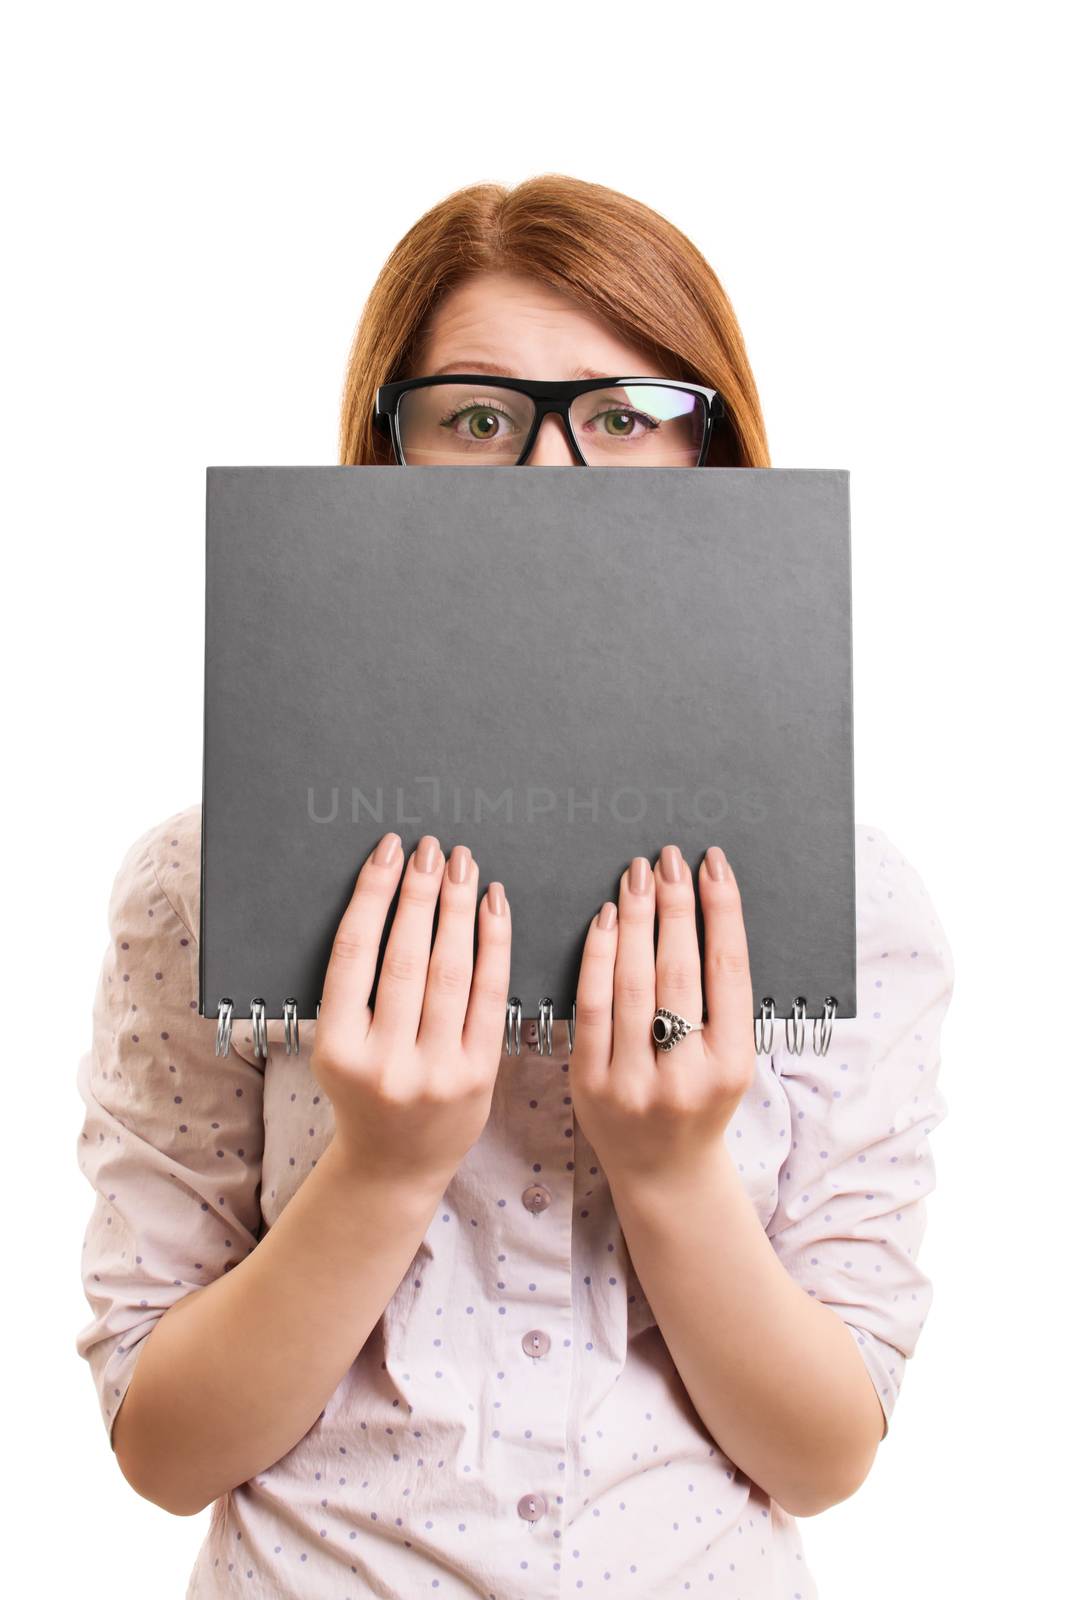 Worried female student hiding behind a book by Mendelex